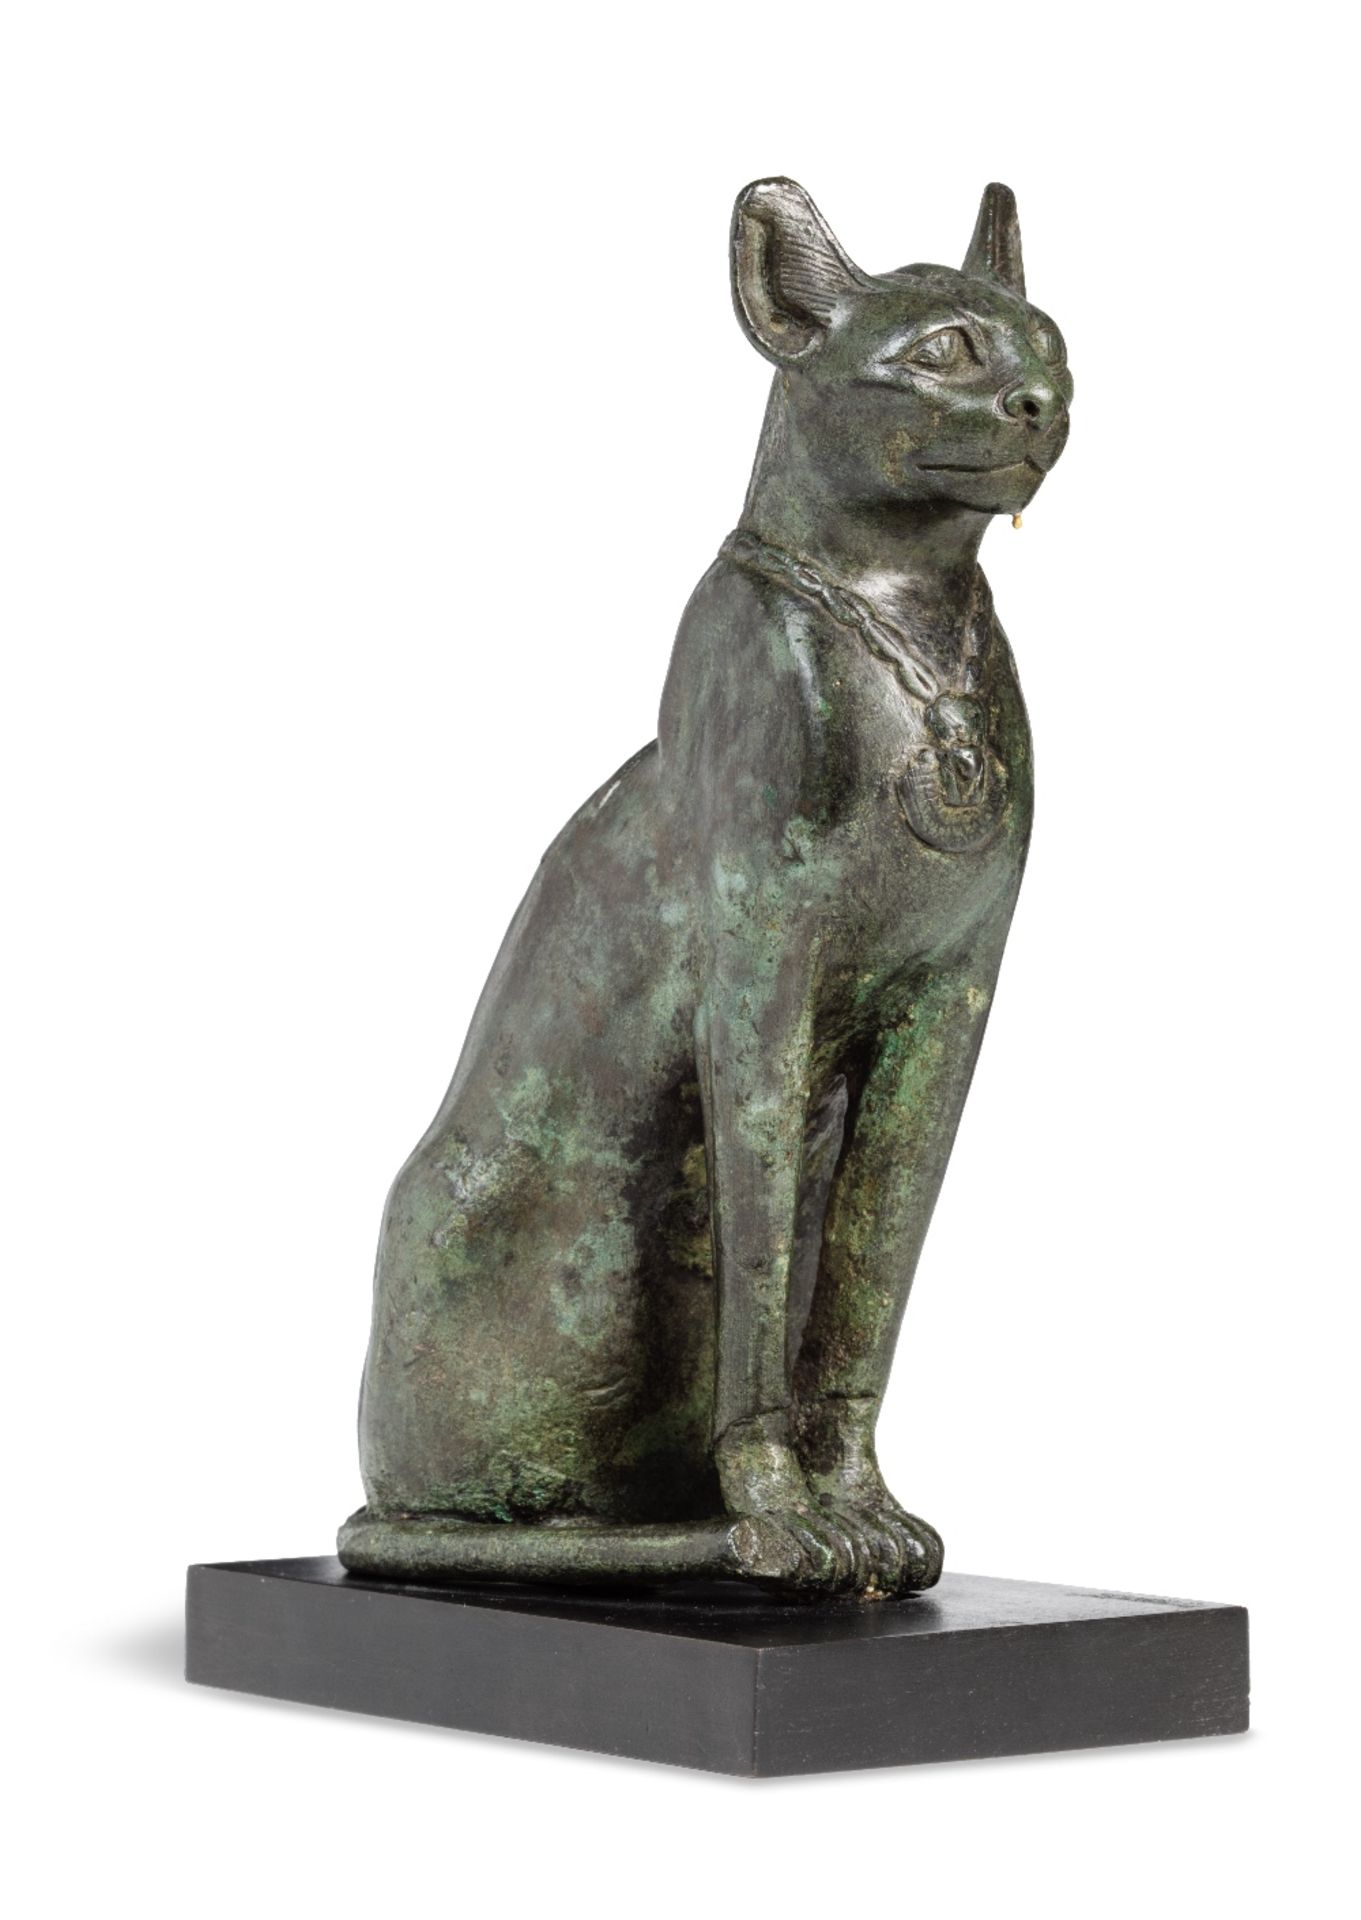 An Egyptian bronze seated cat